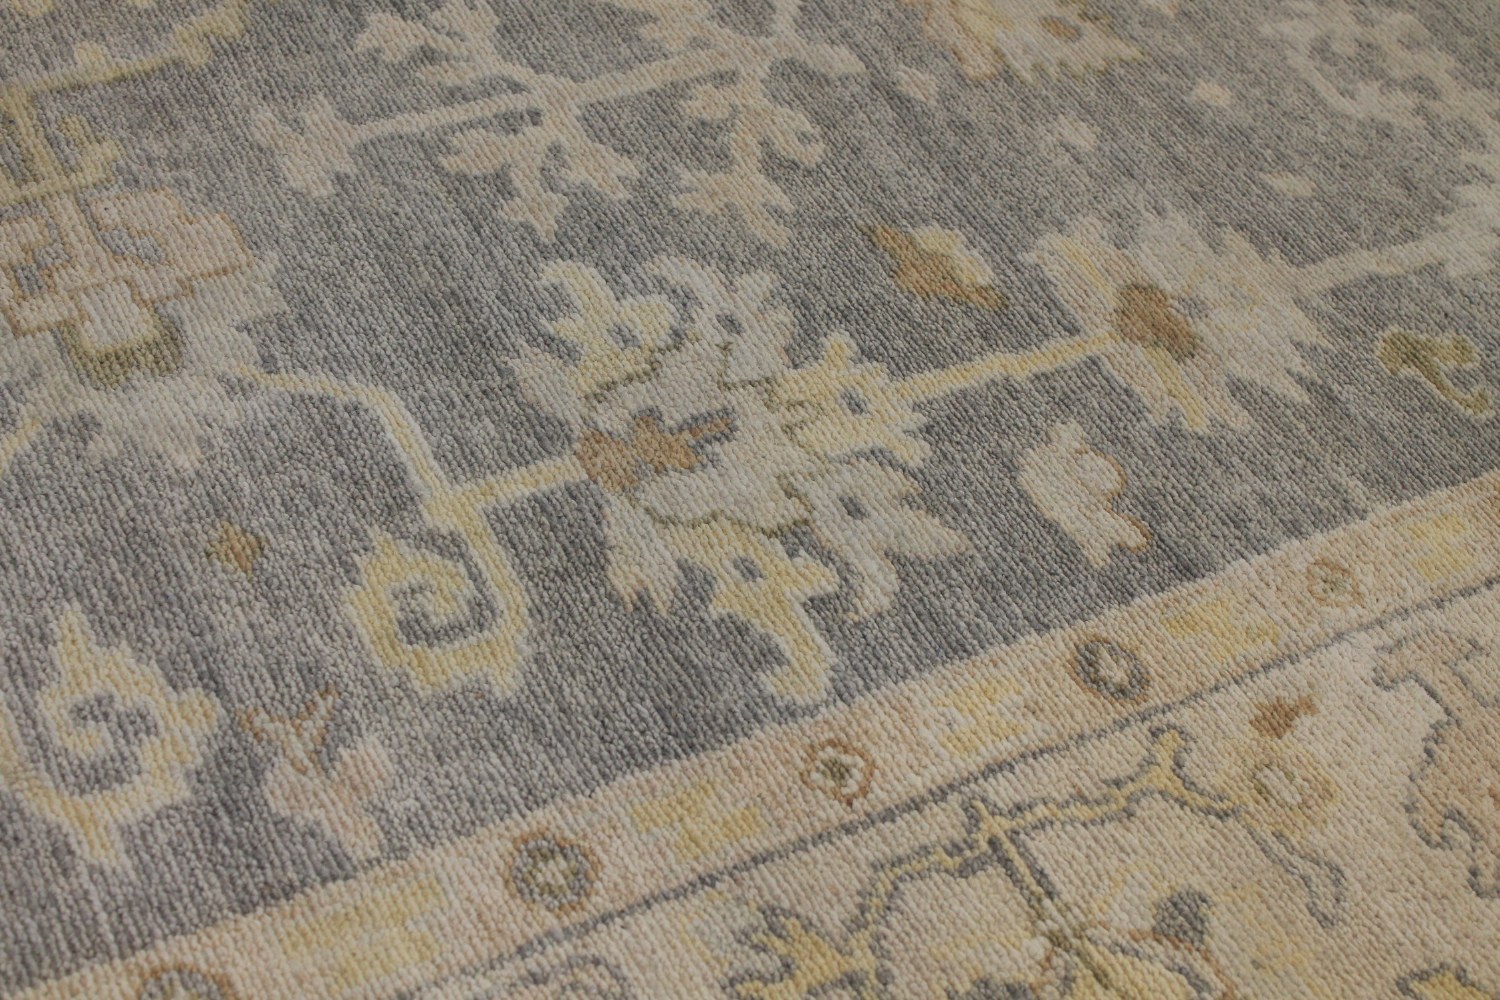 6x9 Oushak Hand Knotted Wool Area Rug - MR026385